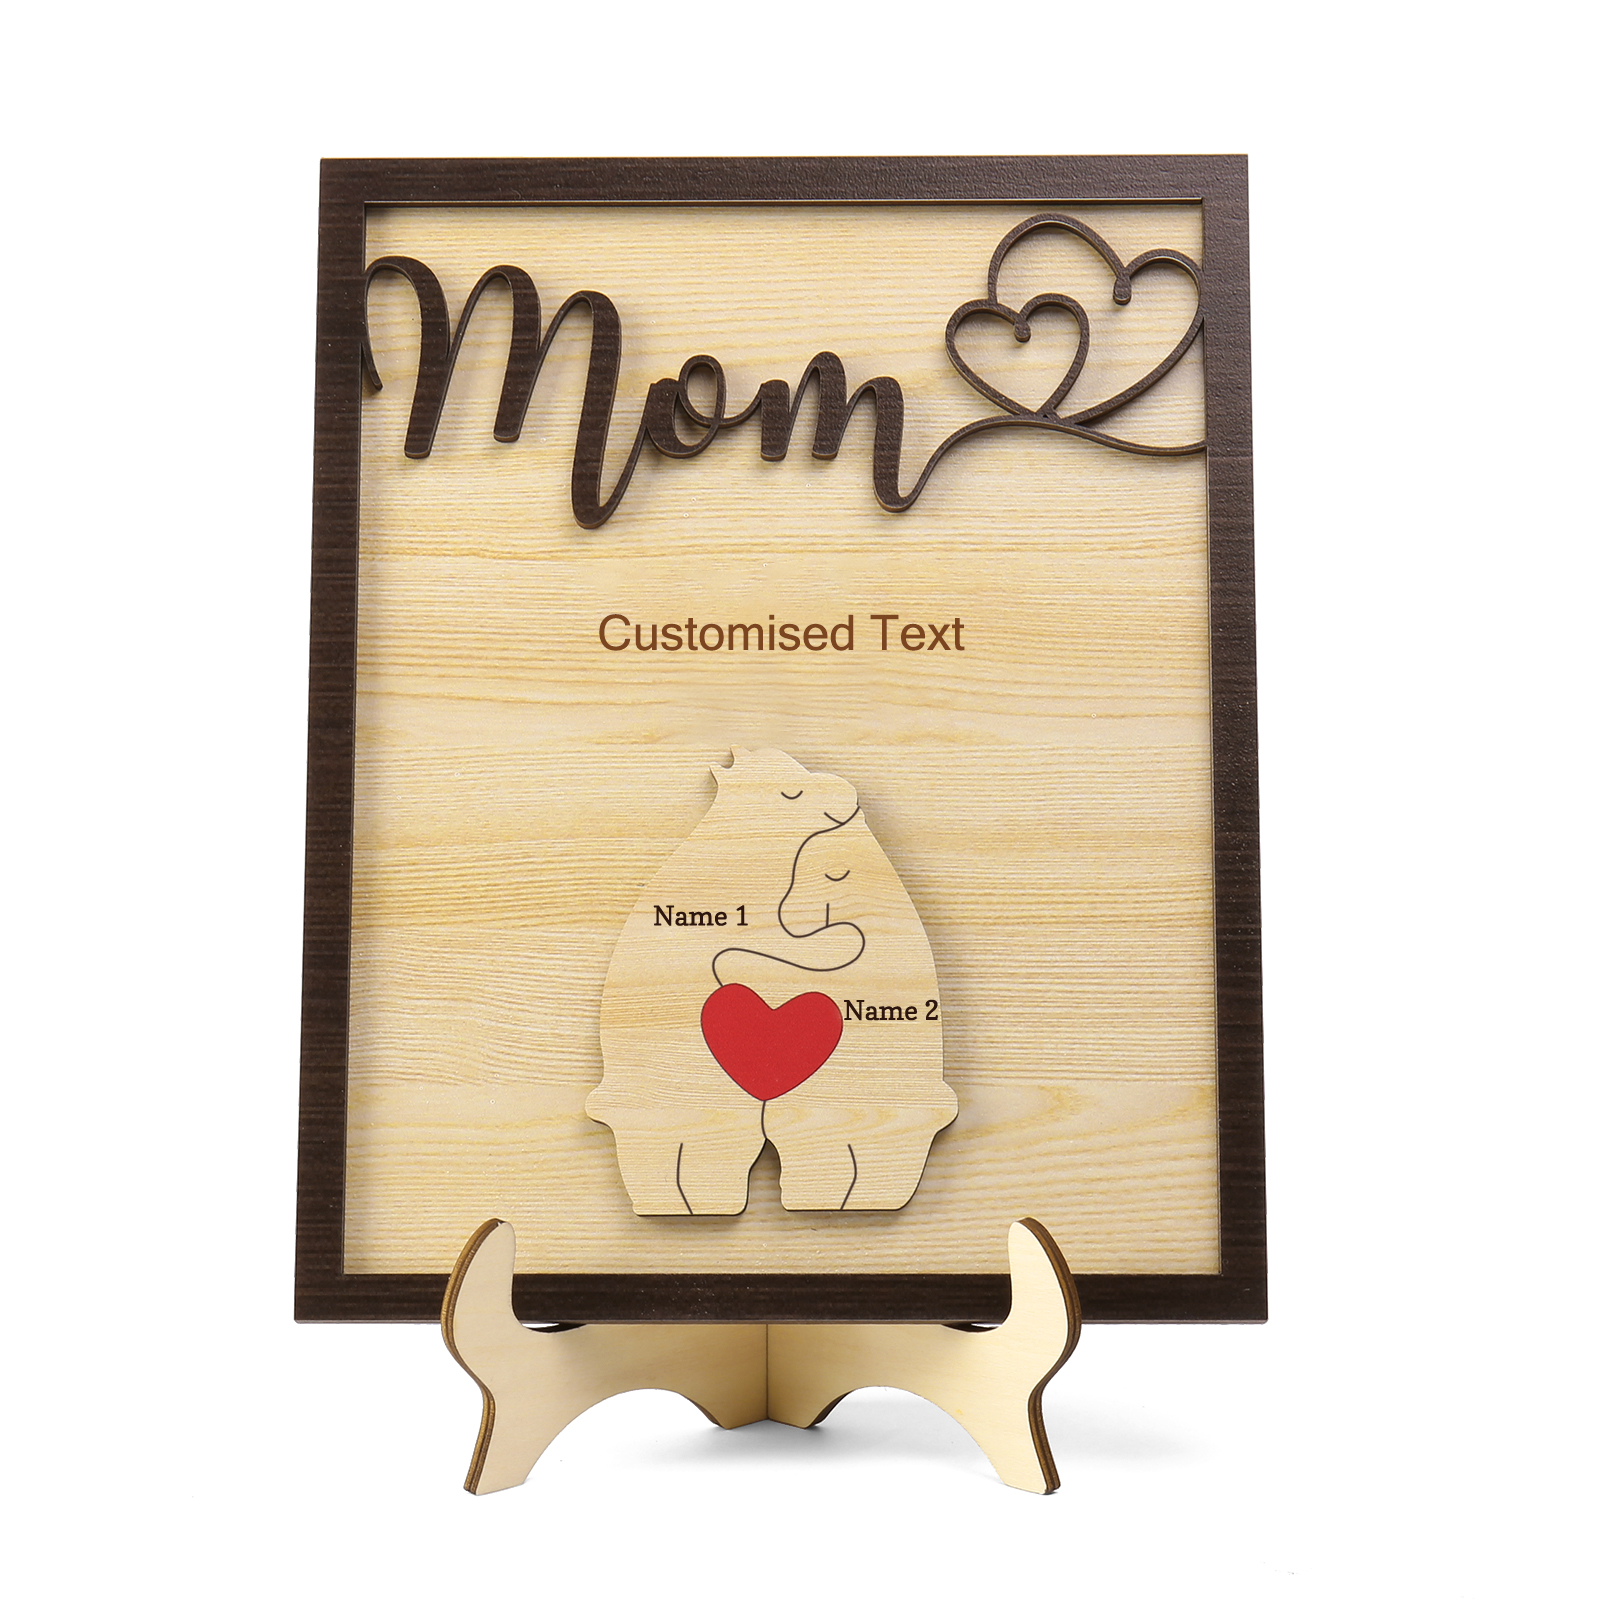 2 Names - Personalized Home Frame Wooden Ornaments Cute Bear Style Customizable 2 Text Ornaments For Mom